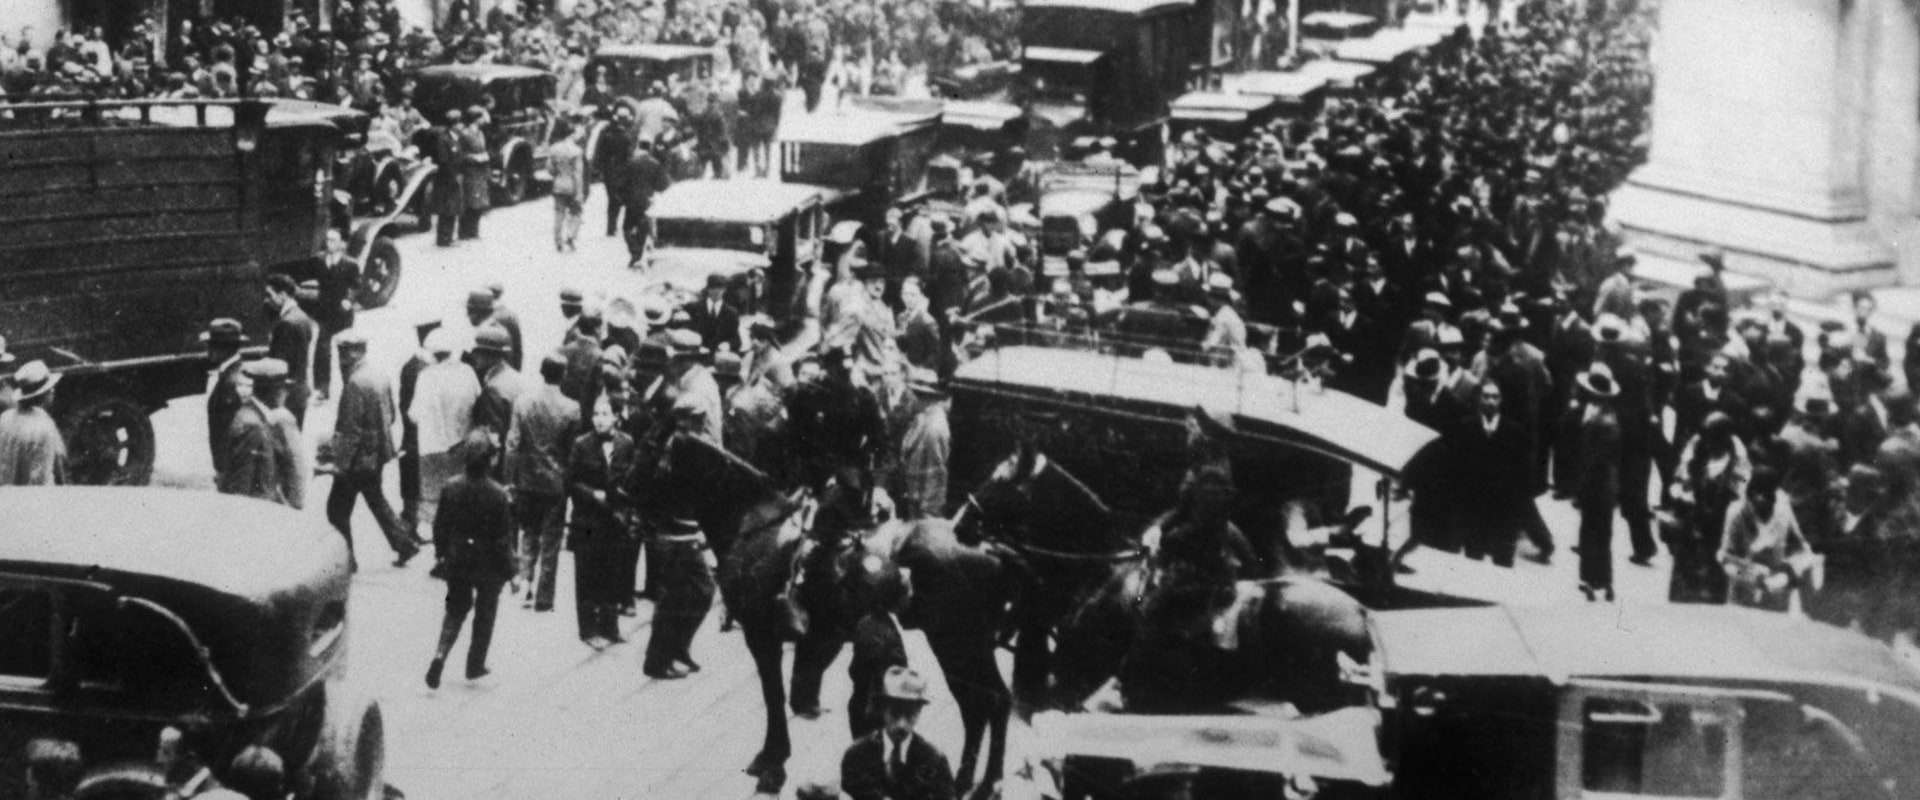 The Causes of the 1929 Stock Market Crash